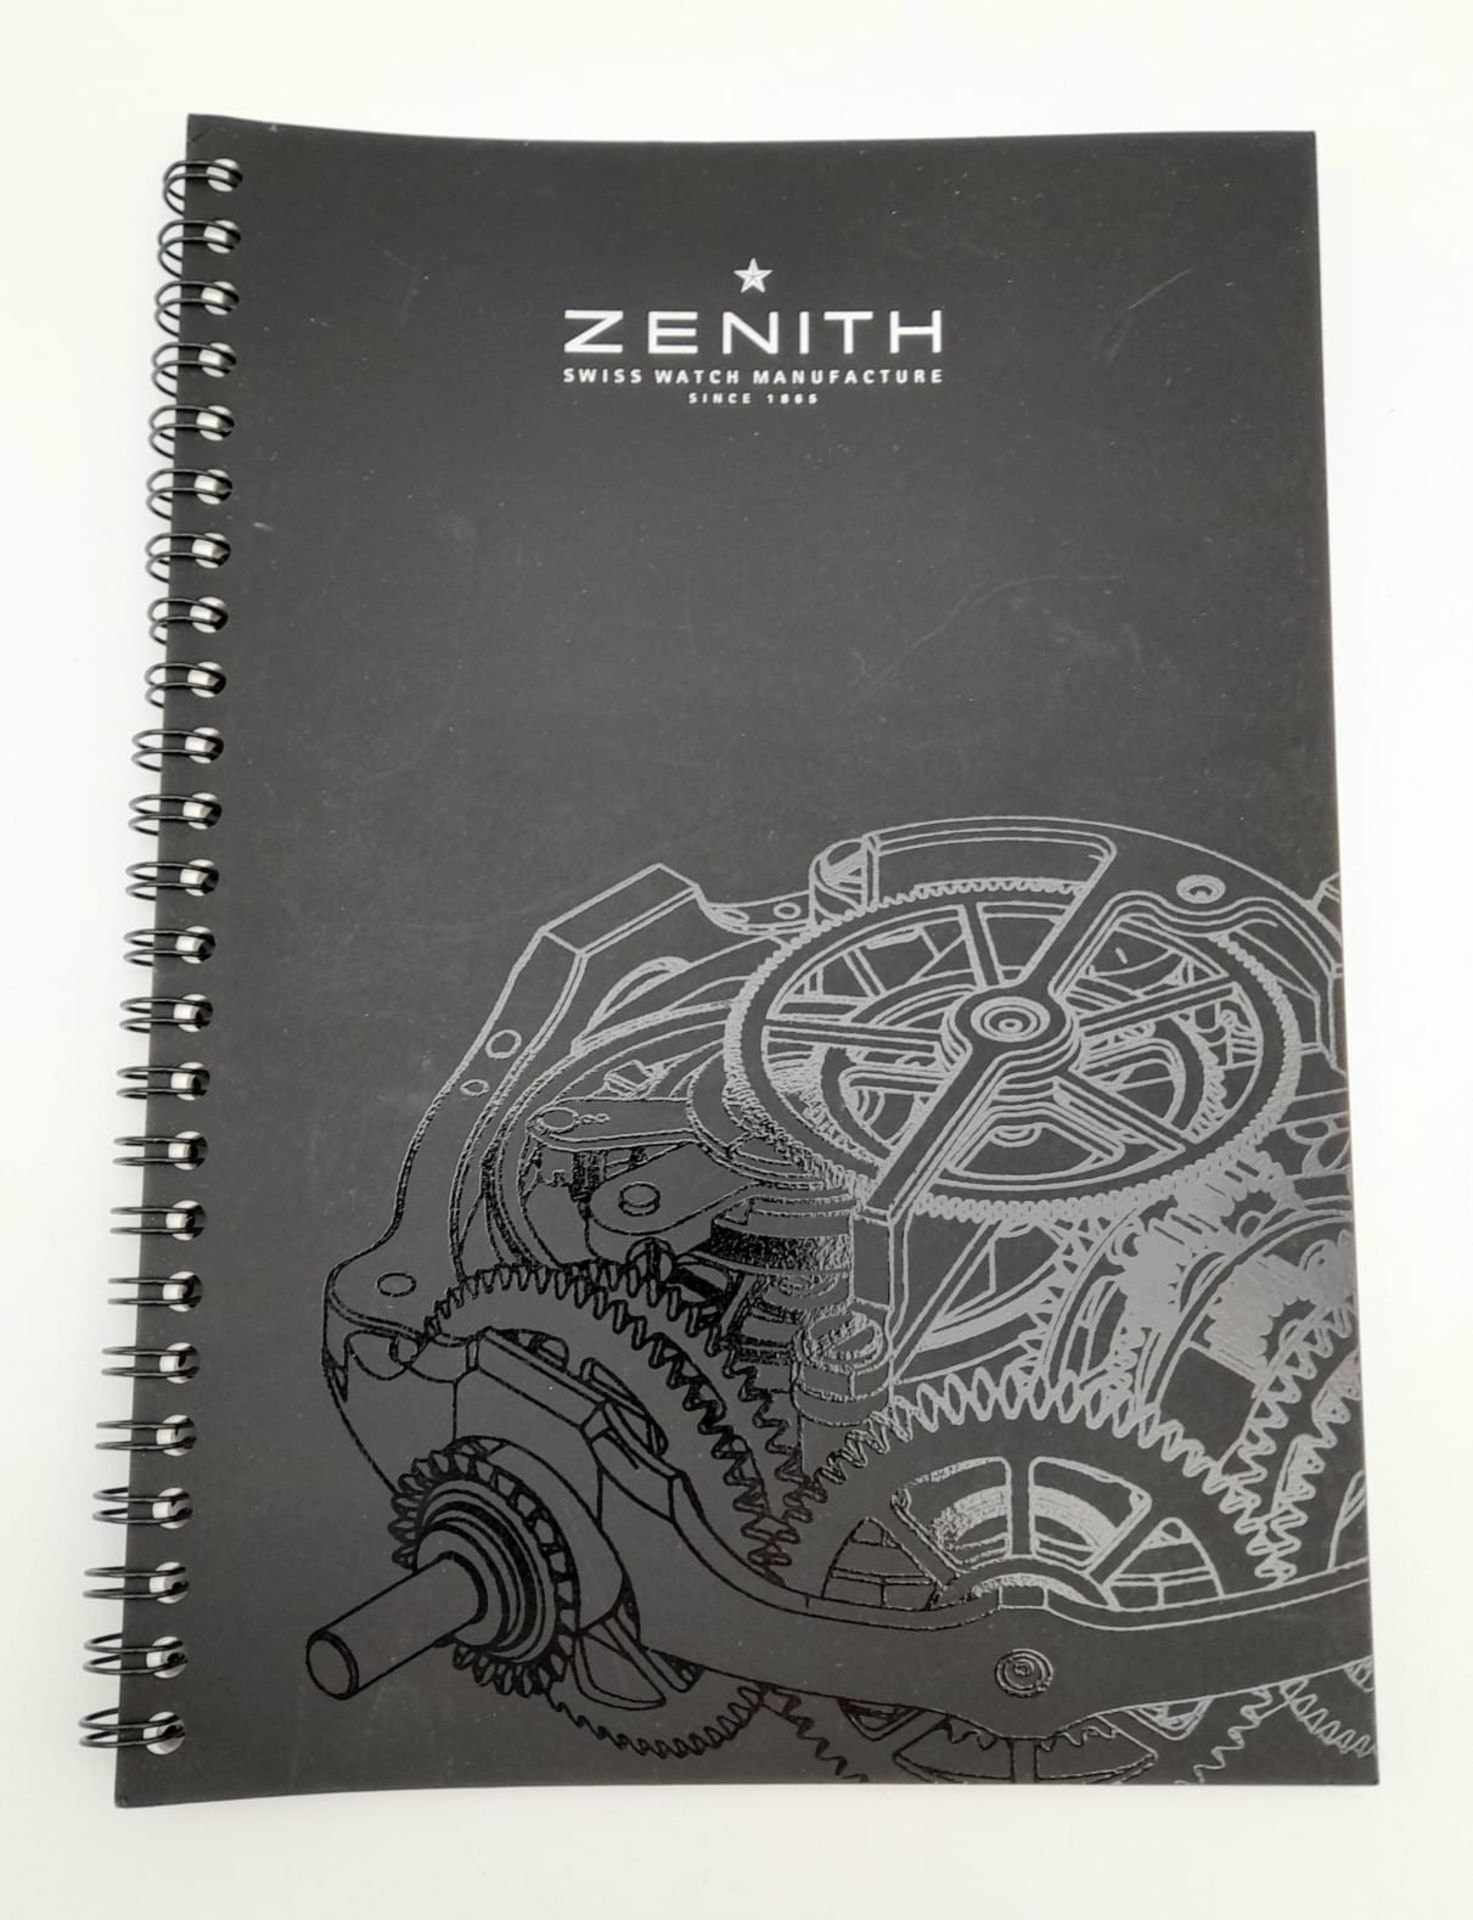 COLLECTION OF 2X ZENITH WATCH COMPANY NOTEBOOKS WITH A ZENITH BOOKMARK - Image 6 of 16